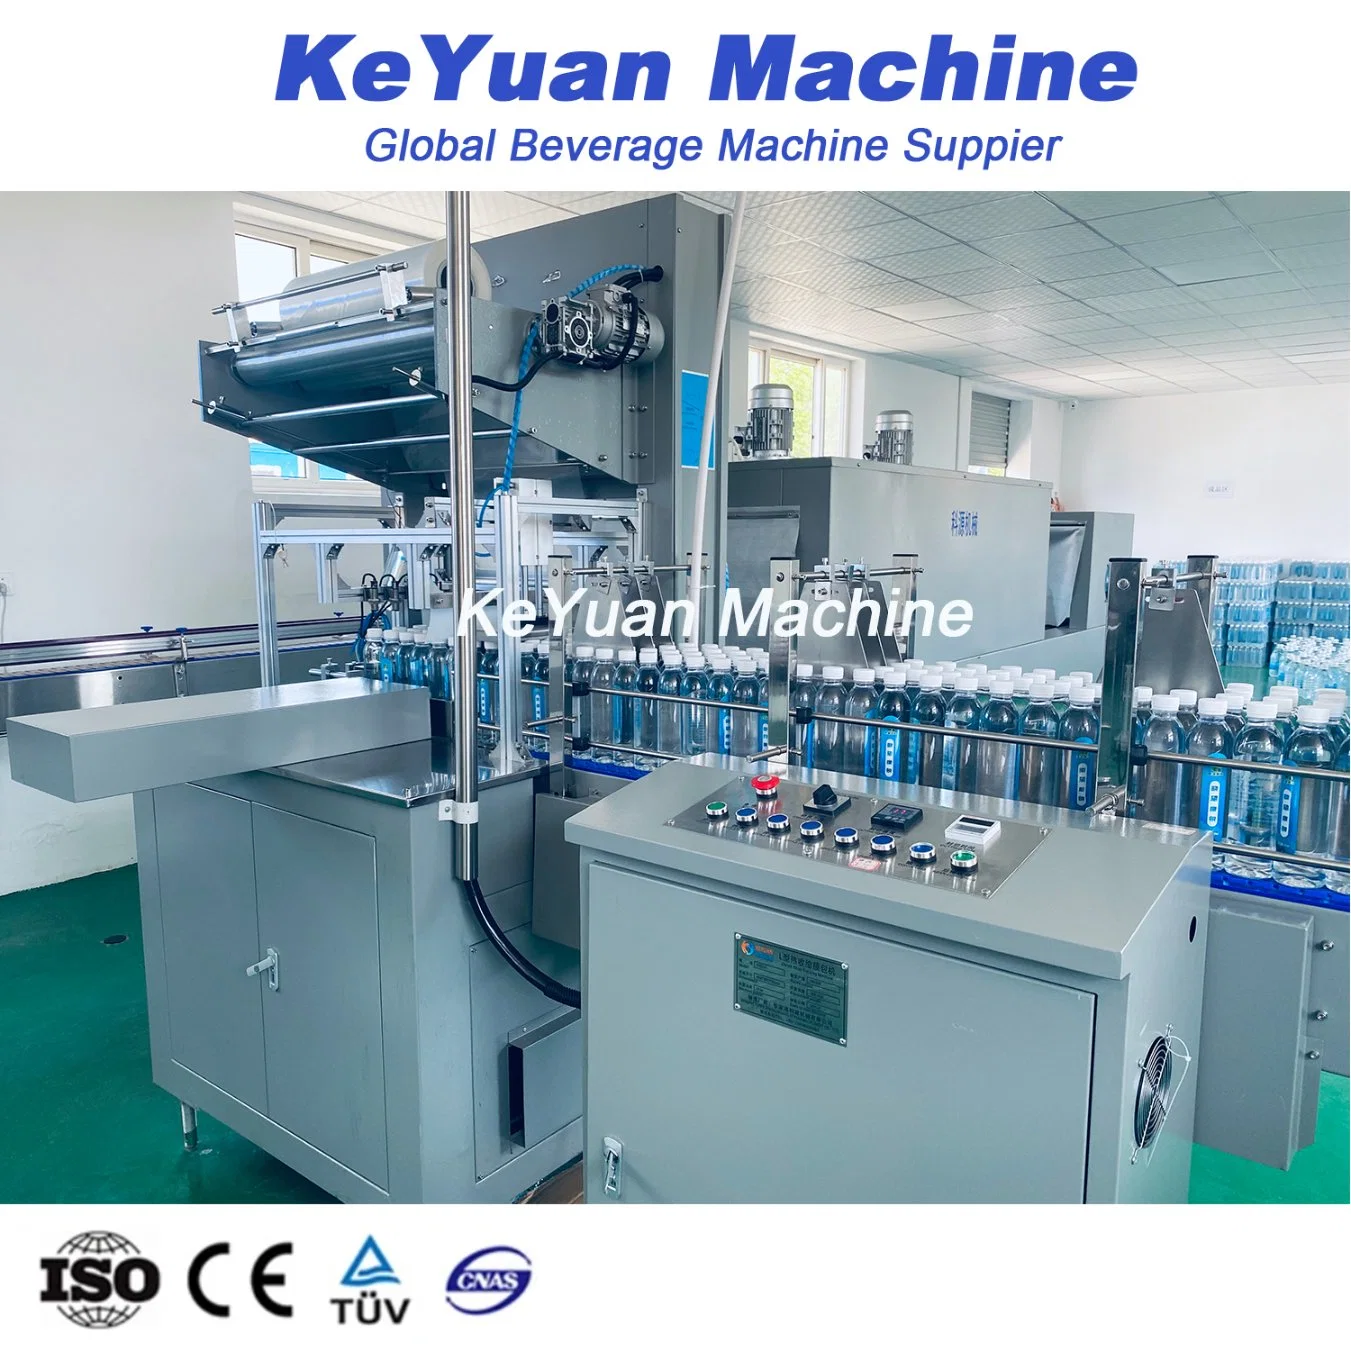 L Type Fully Automatic Sleeve Heat Shrink Tunnel Sealing Wrapper Flow Wrapping Machine Plastic PVC/PE Film Wrap Thermal Side Sealer Packing Packaging Machine